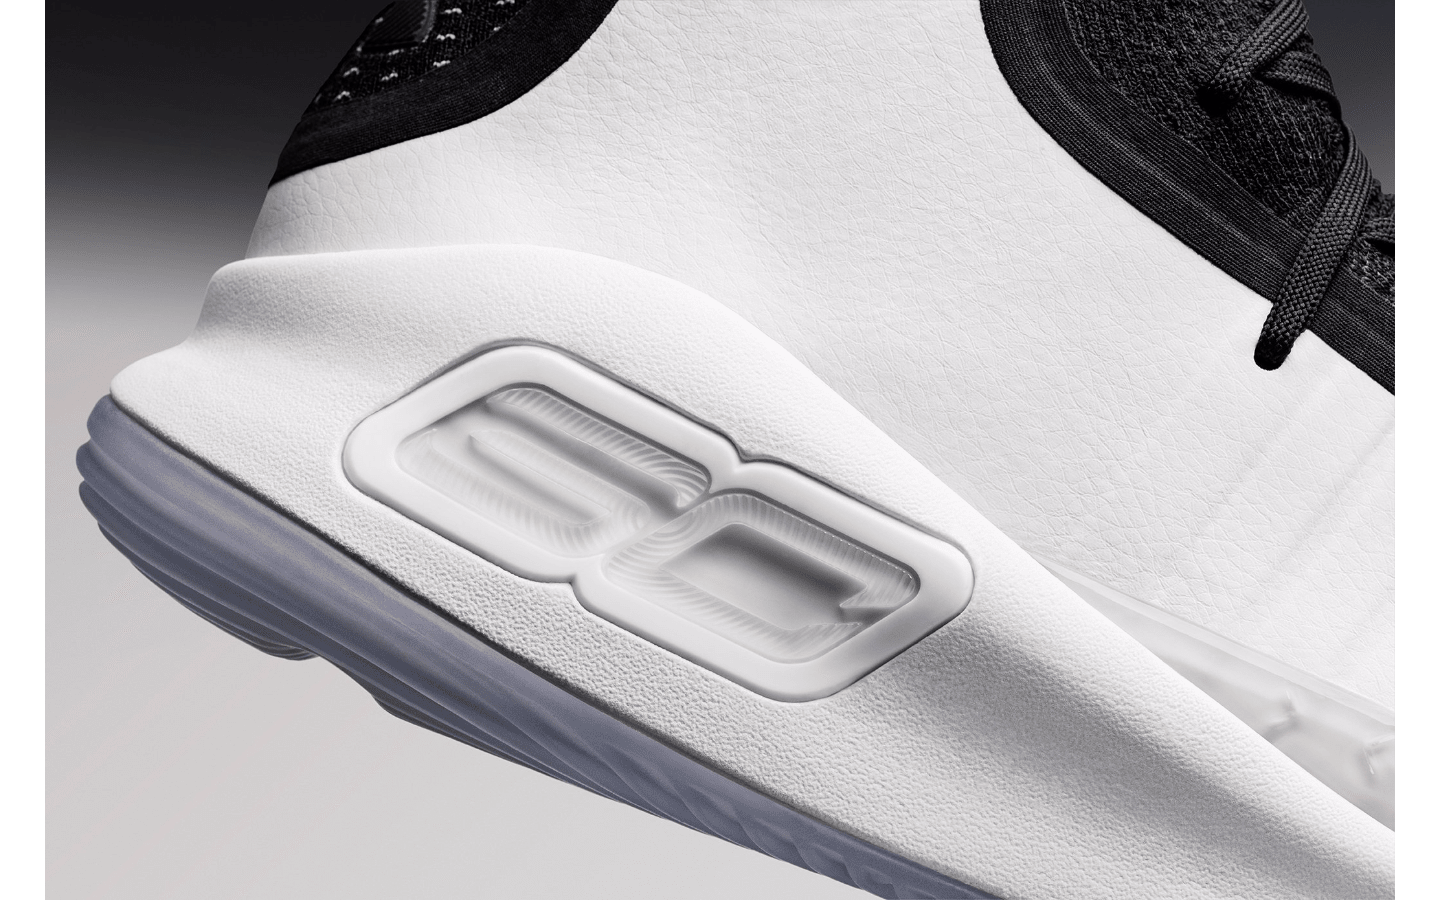 Under Armour Curry 4 Black/White 1298306-007 (Detail 1)